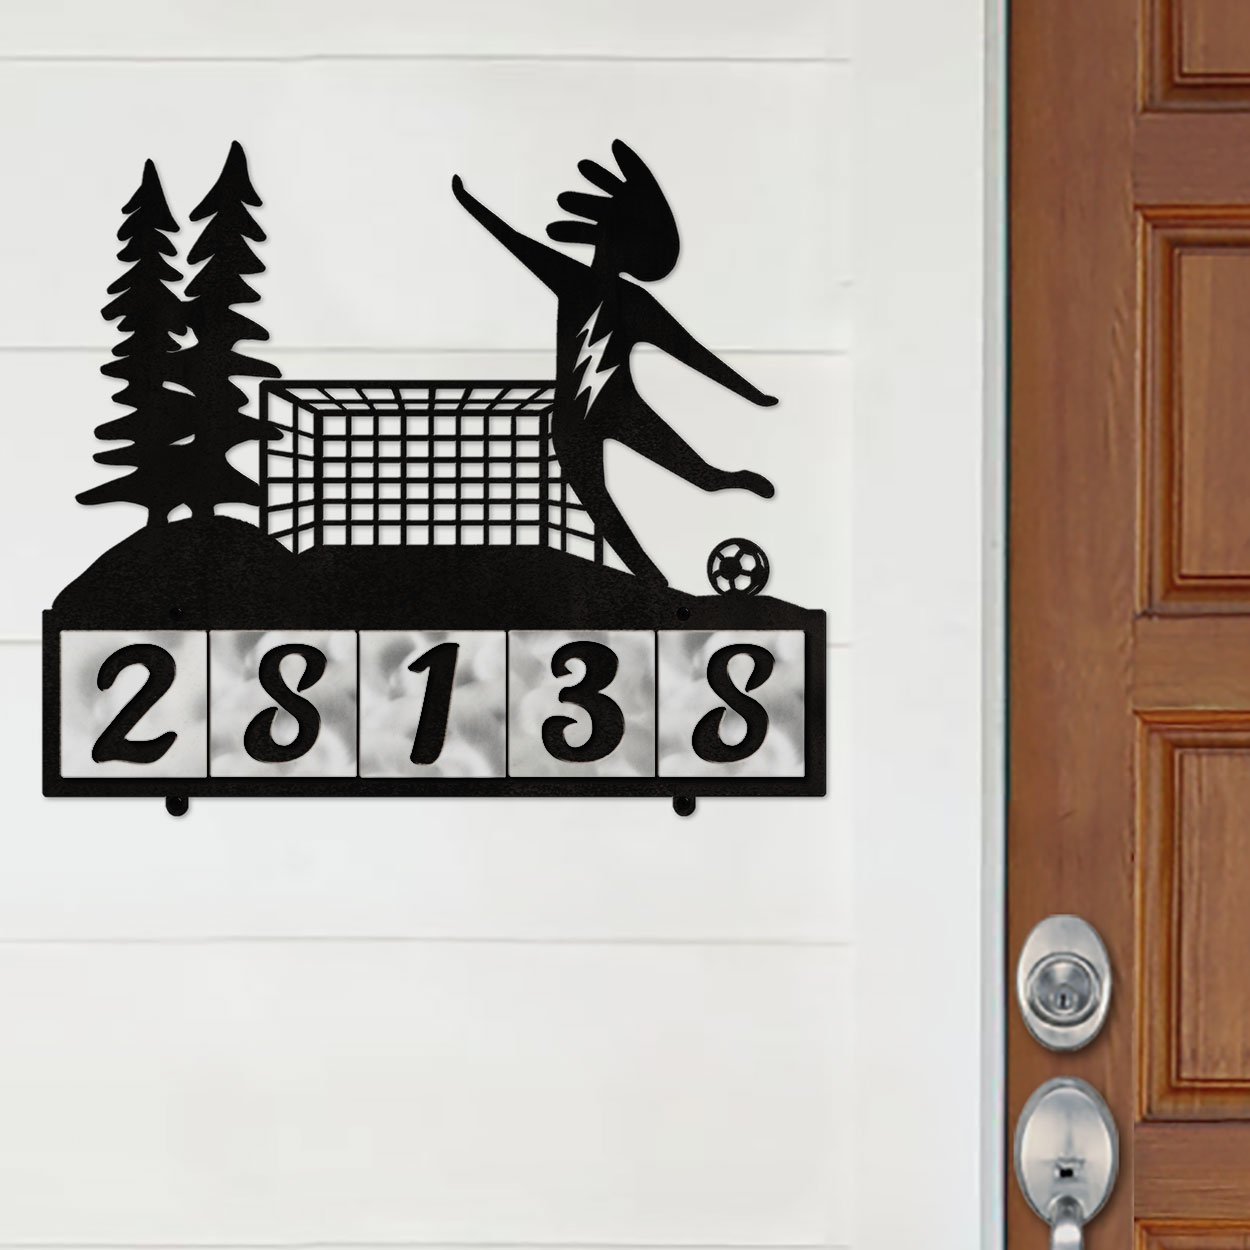 607185 - Kokopelli Lone Soccer Player Design 5-Digit Horizontal 4-inch Tile Outdoor House Numbers